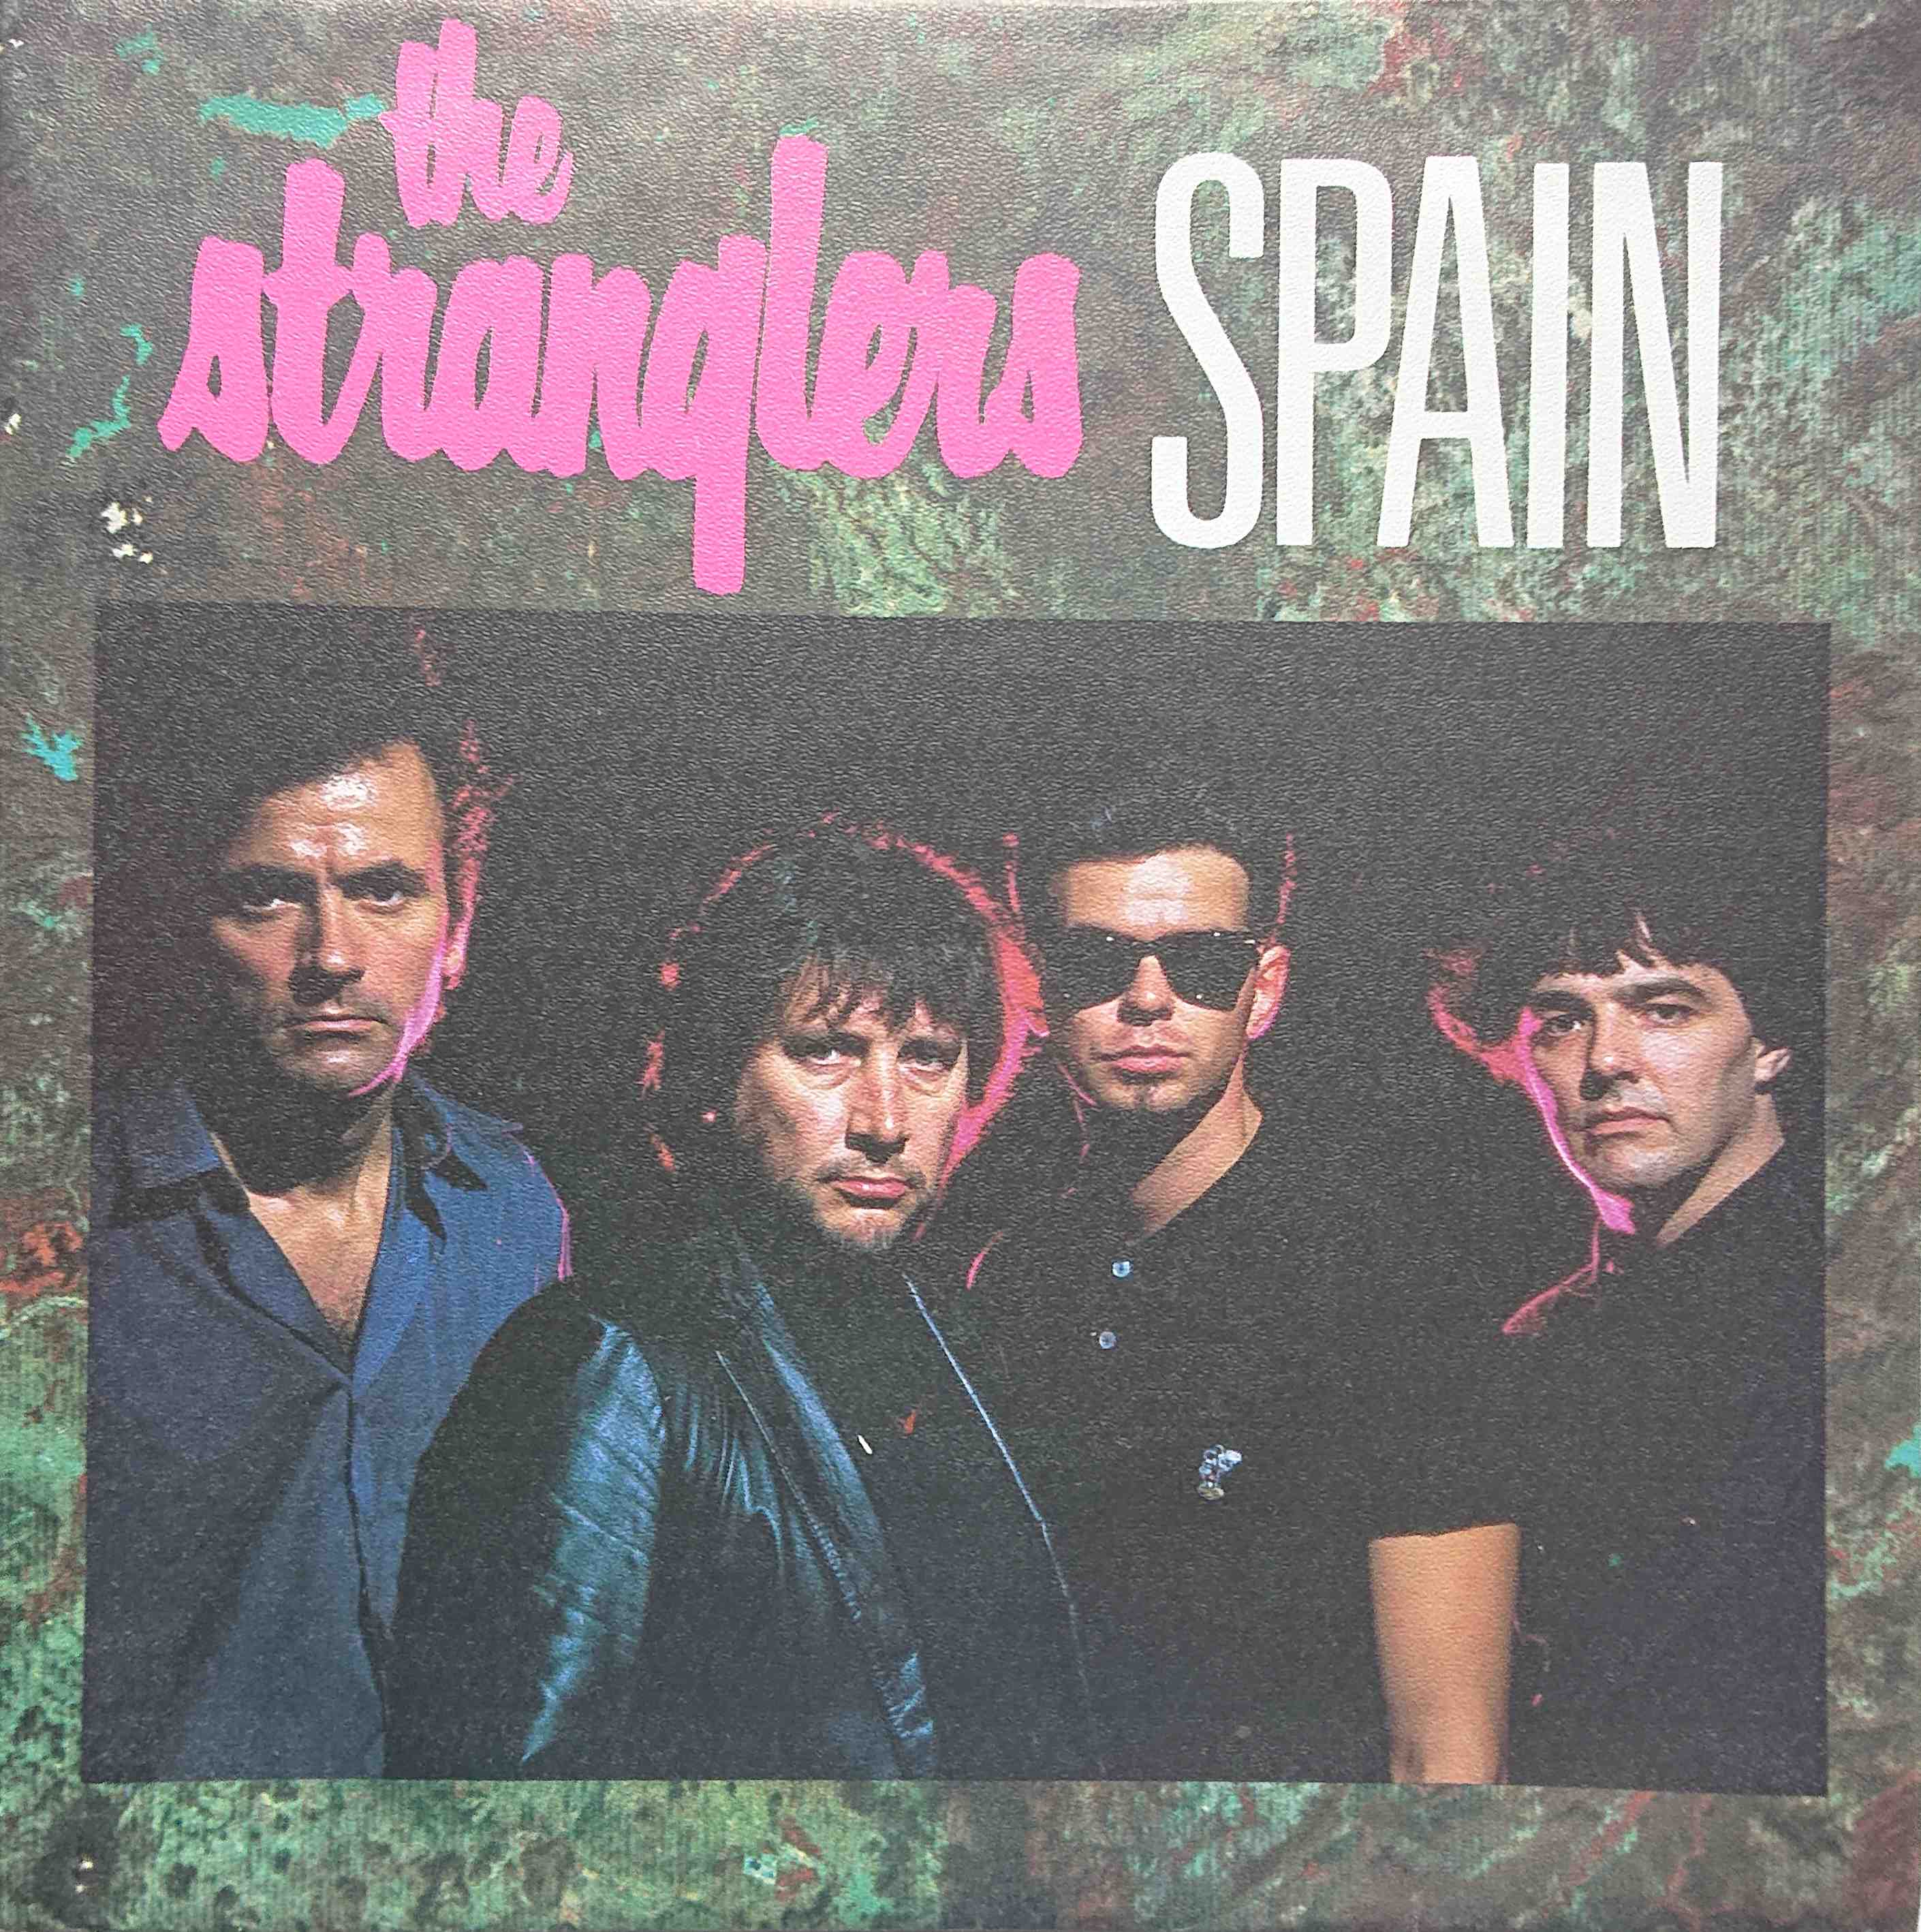 Picture of Spain by artist The Stranglers from The Stranglers singles